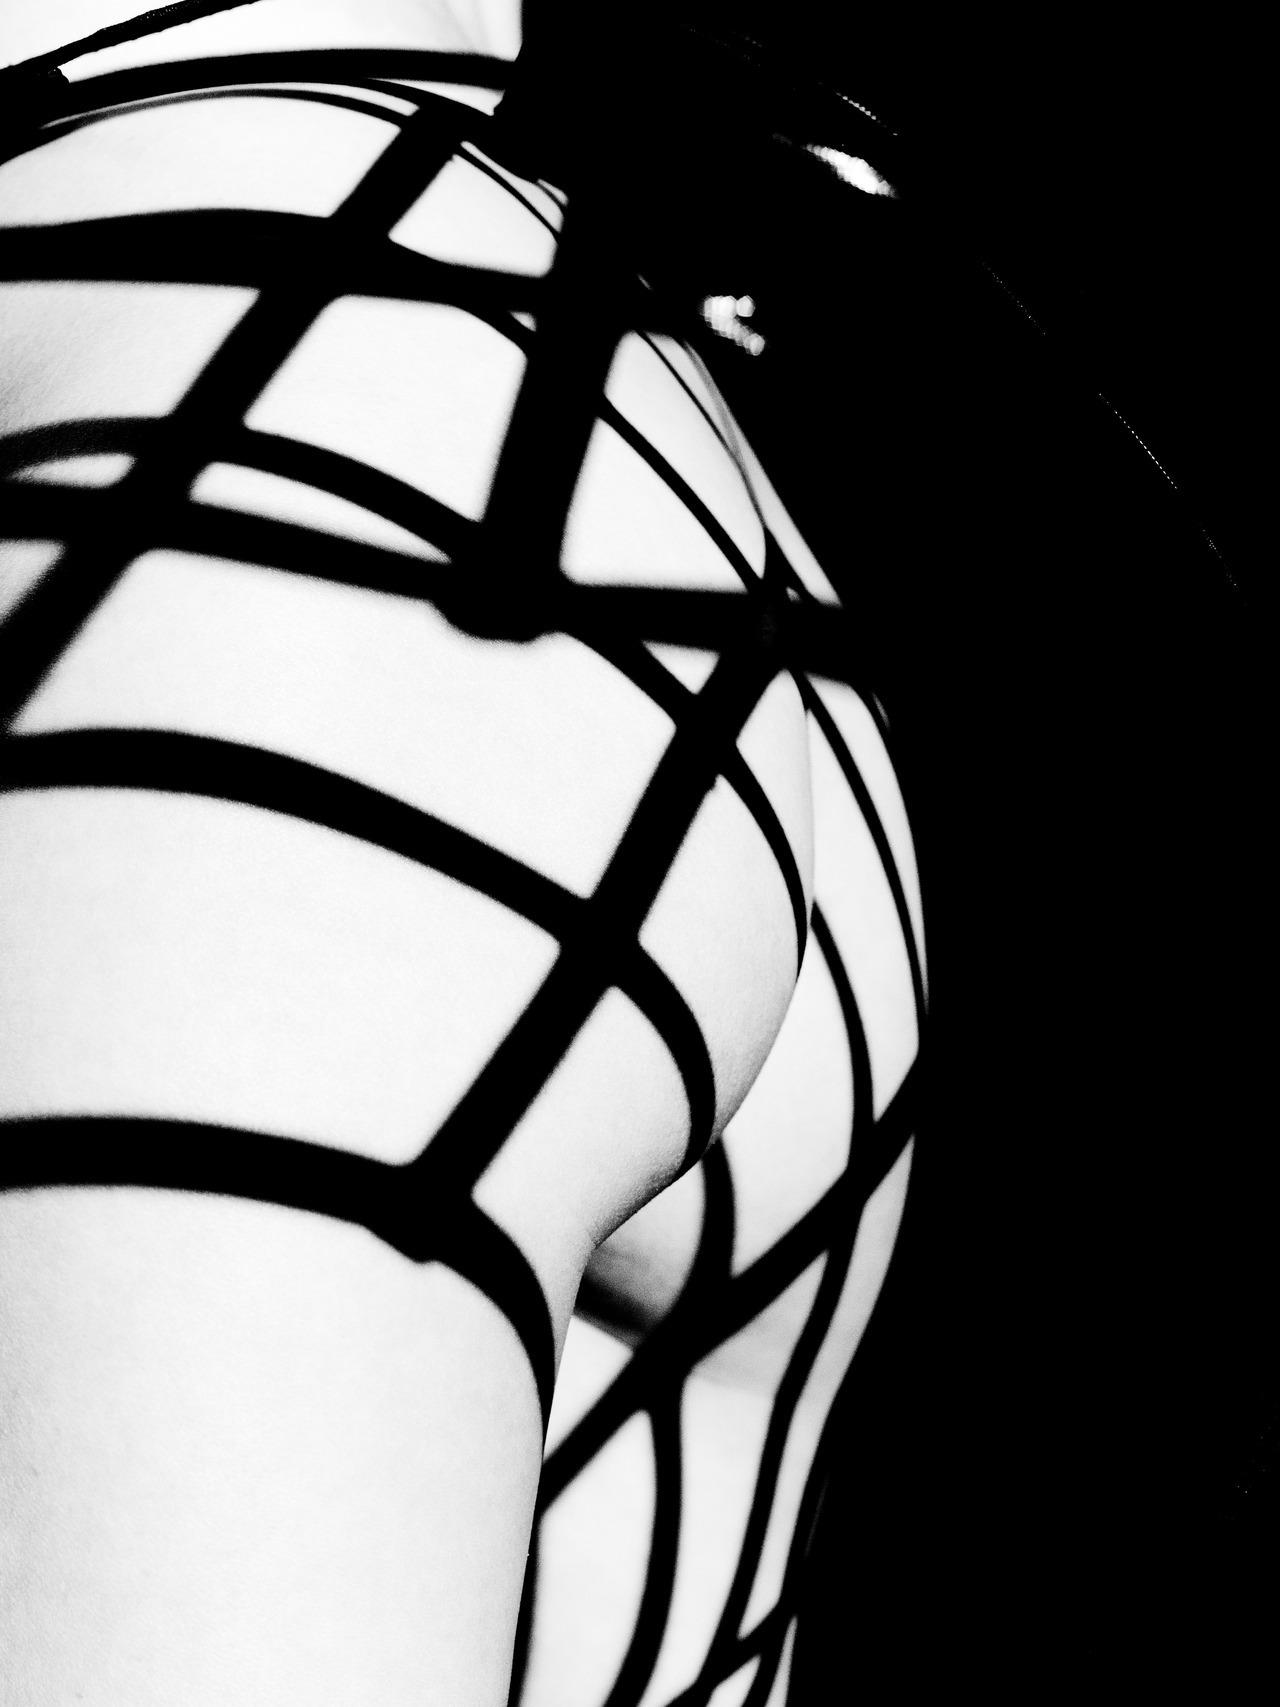 Heather Huey was shot by Billy kidd. The Book. Heather Huey was shot by Billy Kidd is a lyrical, sensually-charged photographic exploration of the complicity between the artist and model as both lovers and creative partners. Shot by photographer Billy Kidd, these abstract black and white images feature milliner Heather Huey obscuring her kinetic, blurred nude form with her own futuristic body cage, braid and cocoon designs. The resultant body of work obliquely invokes the spirit of Man Ray and Lee Miller while also remaining a unique statement of a time when fashion and art are more symbiotic than ever. Designed by Alex Wiederin. 8.5&#8221; x 11.5&#8221; Limited edition of 500 Hard Bound 102 pages Matte paper/Gloss over images The Book is now for sale online. Since the book is in such high demand and limited to only 500, we are only selling 125 online.